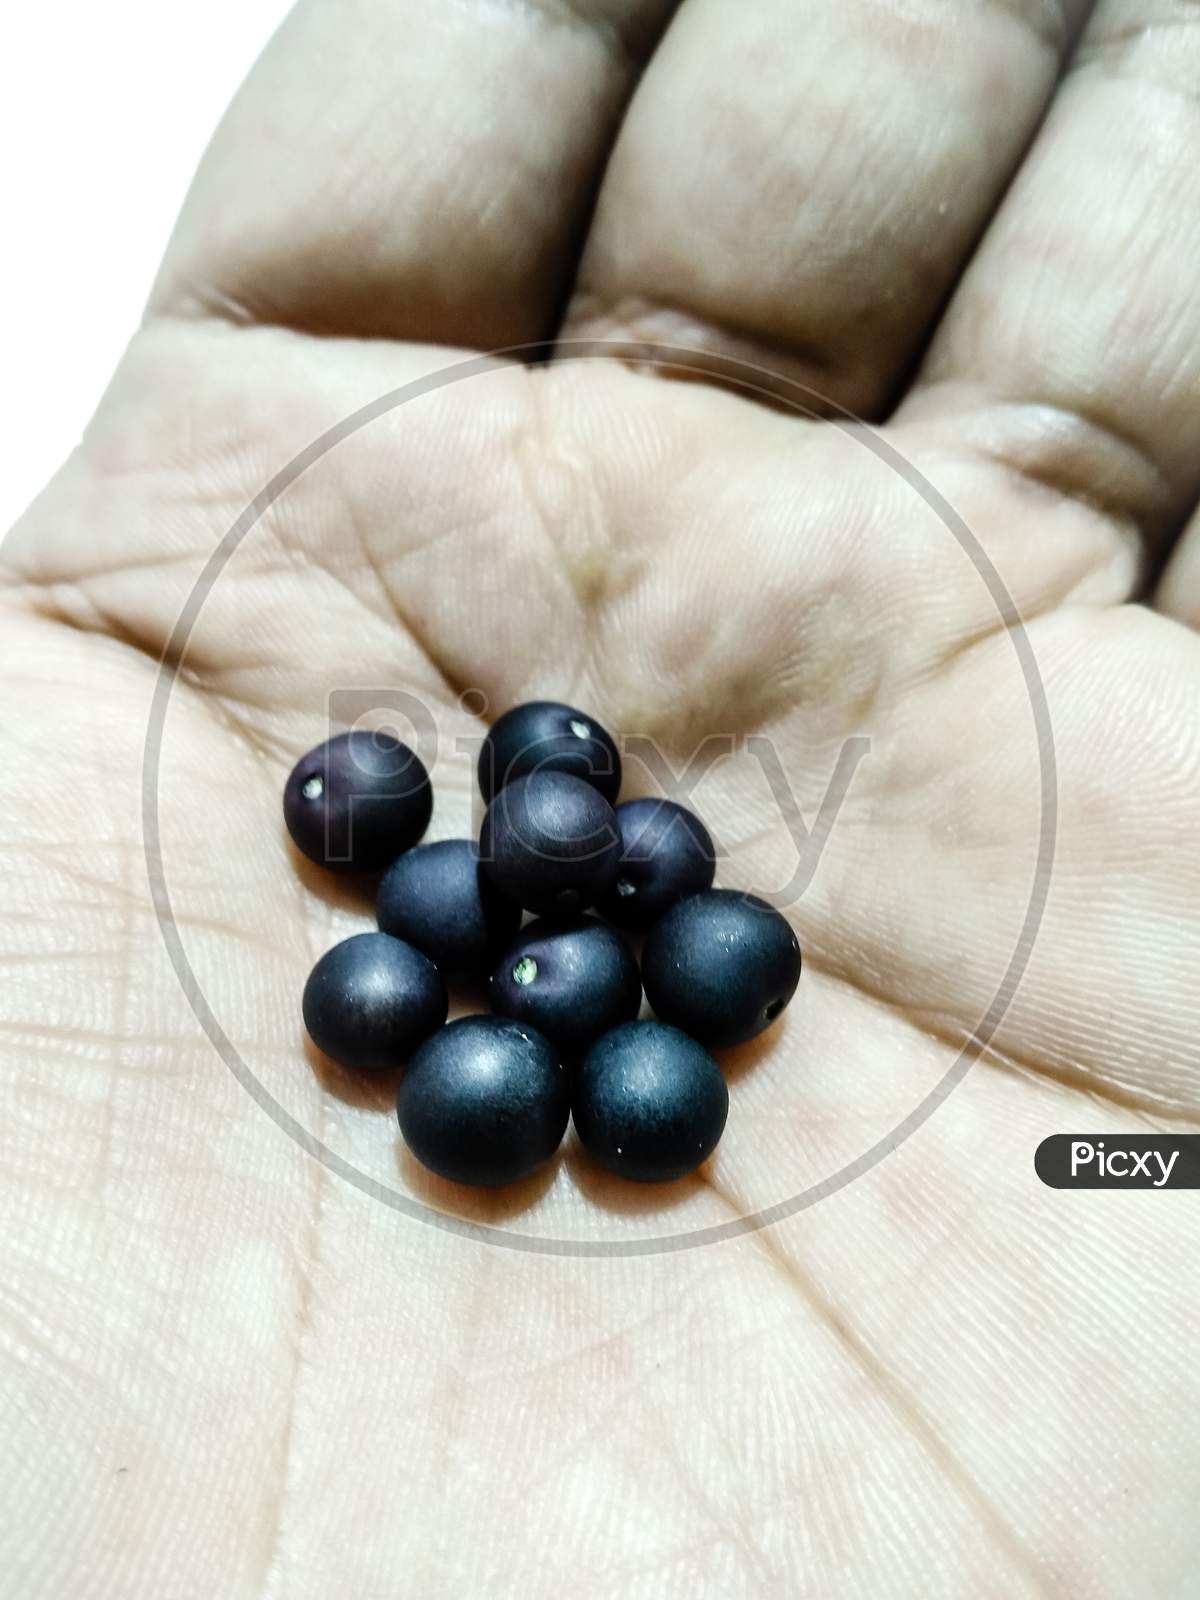 A picture of blackberry